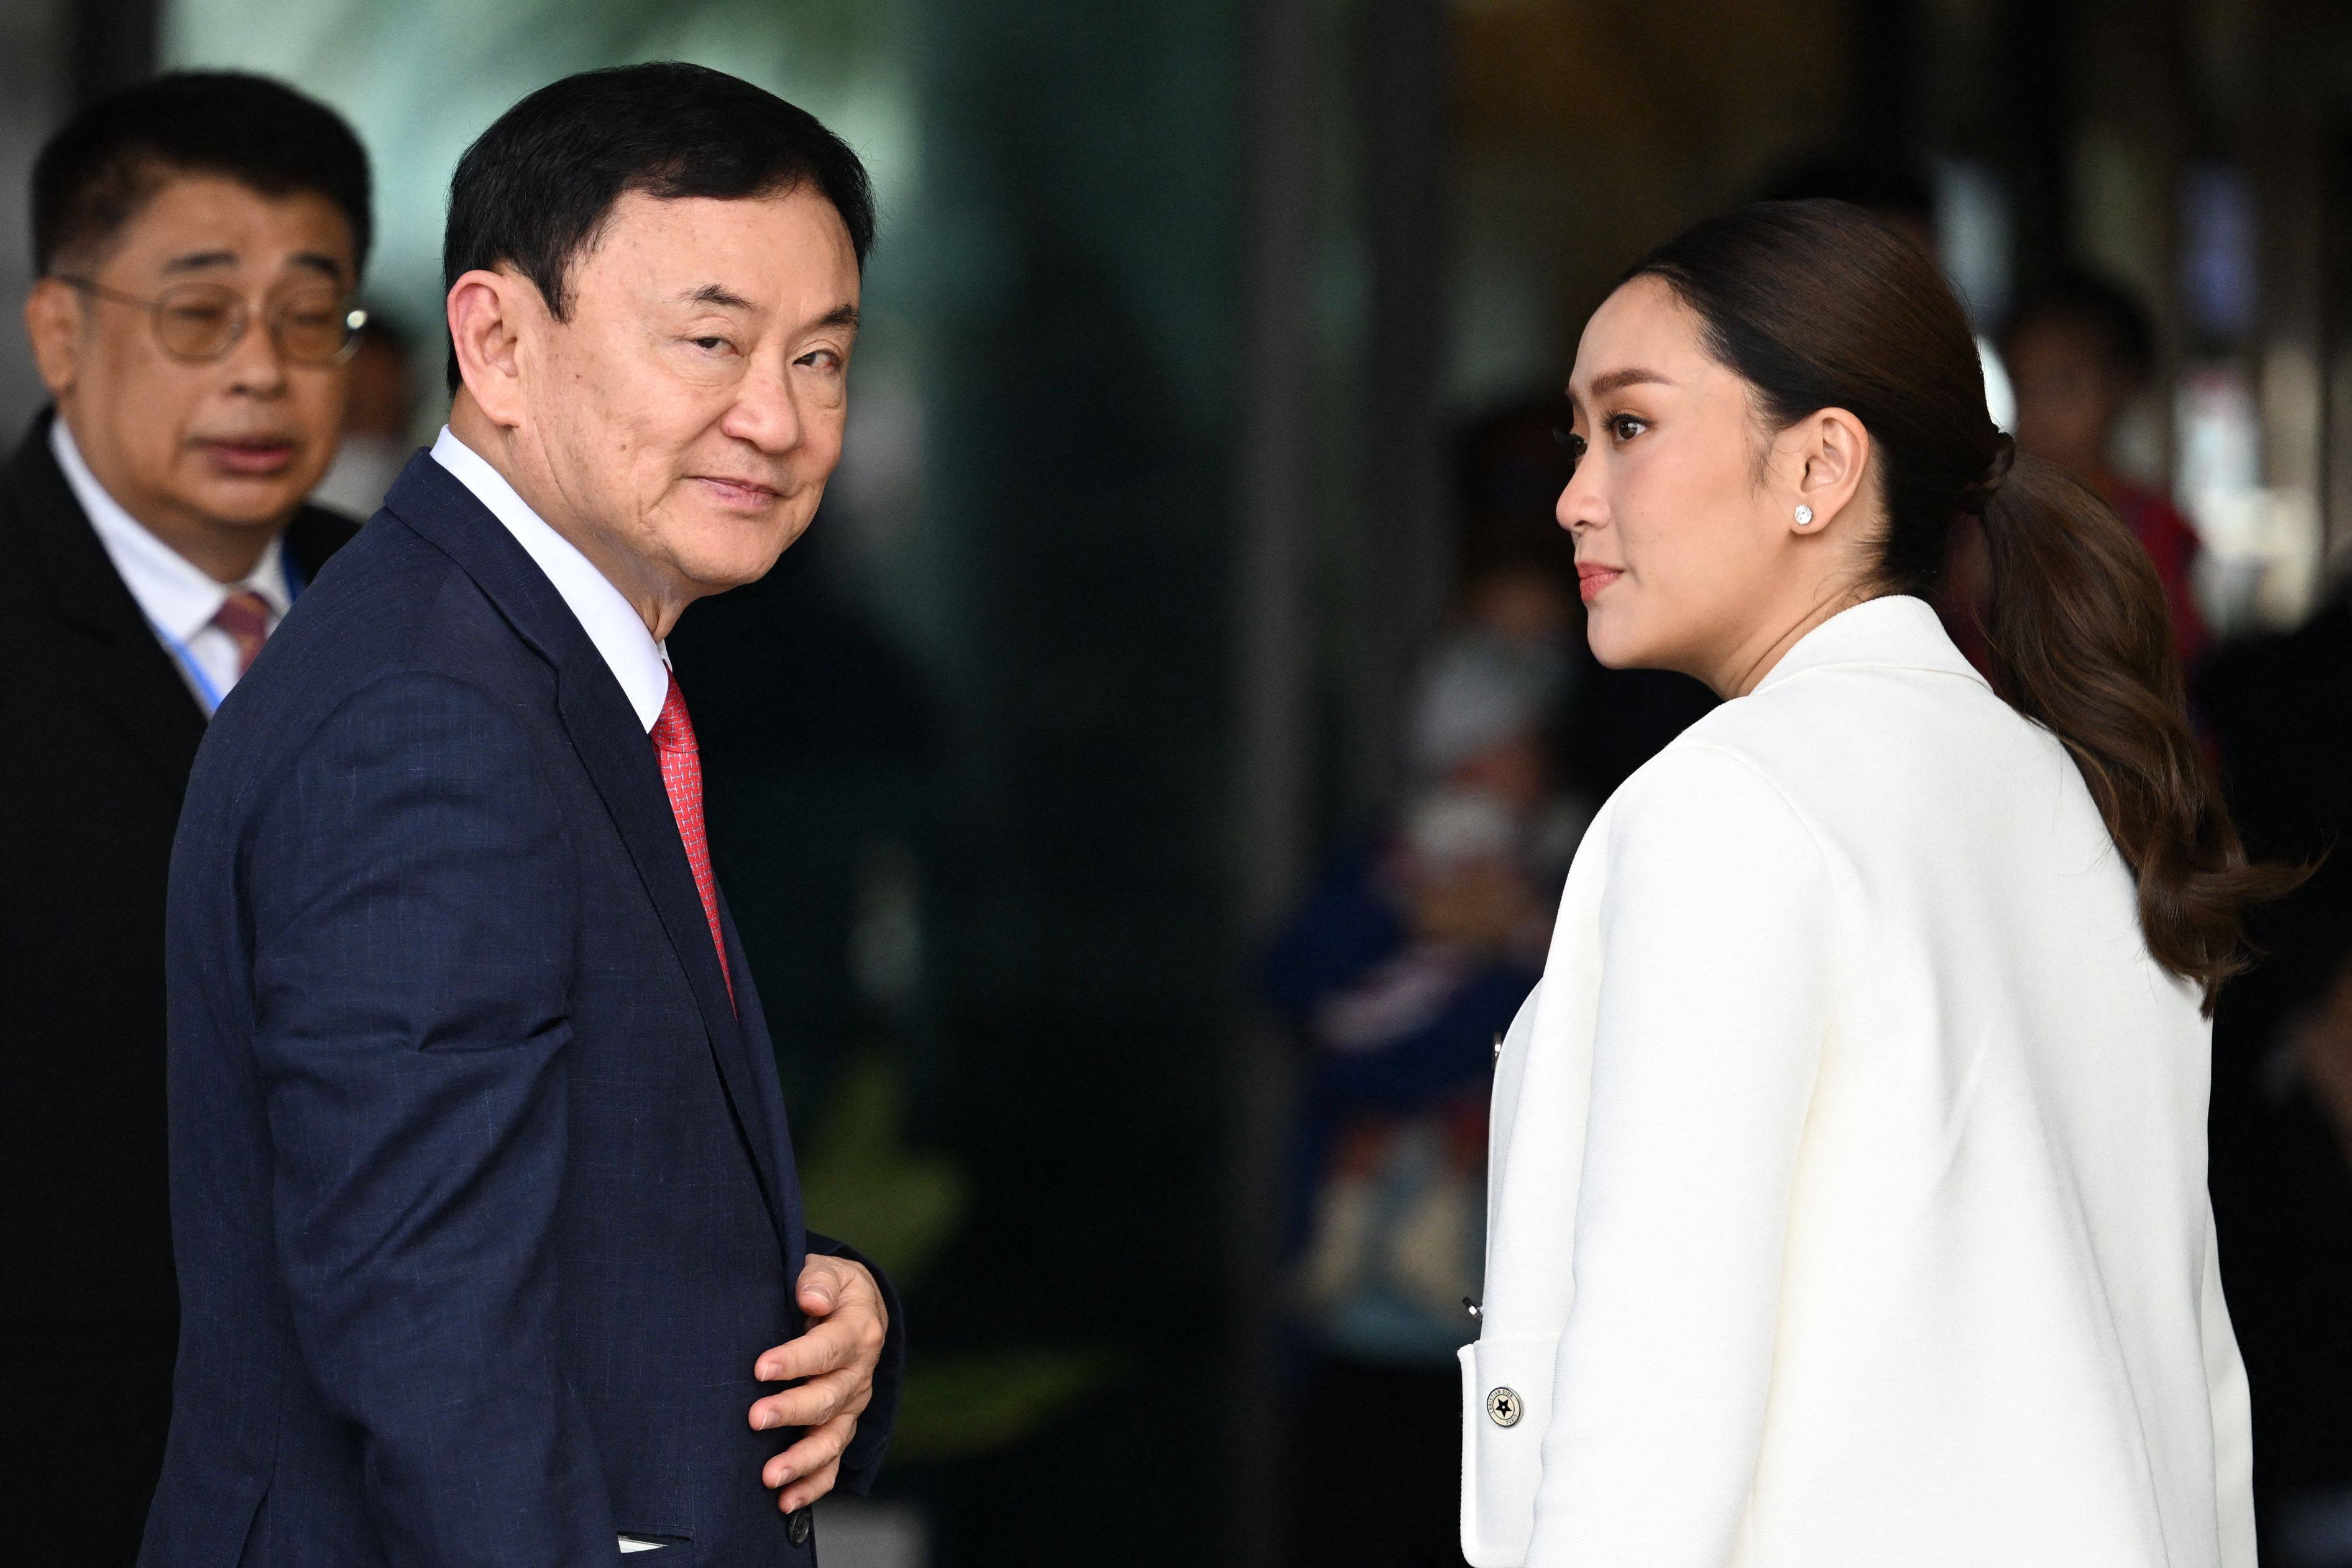 Former Thai Prime Minister Thaksin Shinawatra pictured on Tuesday upon arrival at Bangkok’s Don Mueang airport after 15 years in exile. He was jailed the same day. Photo: AFP